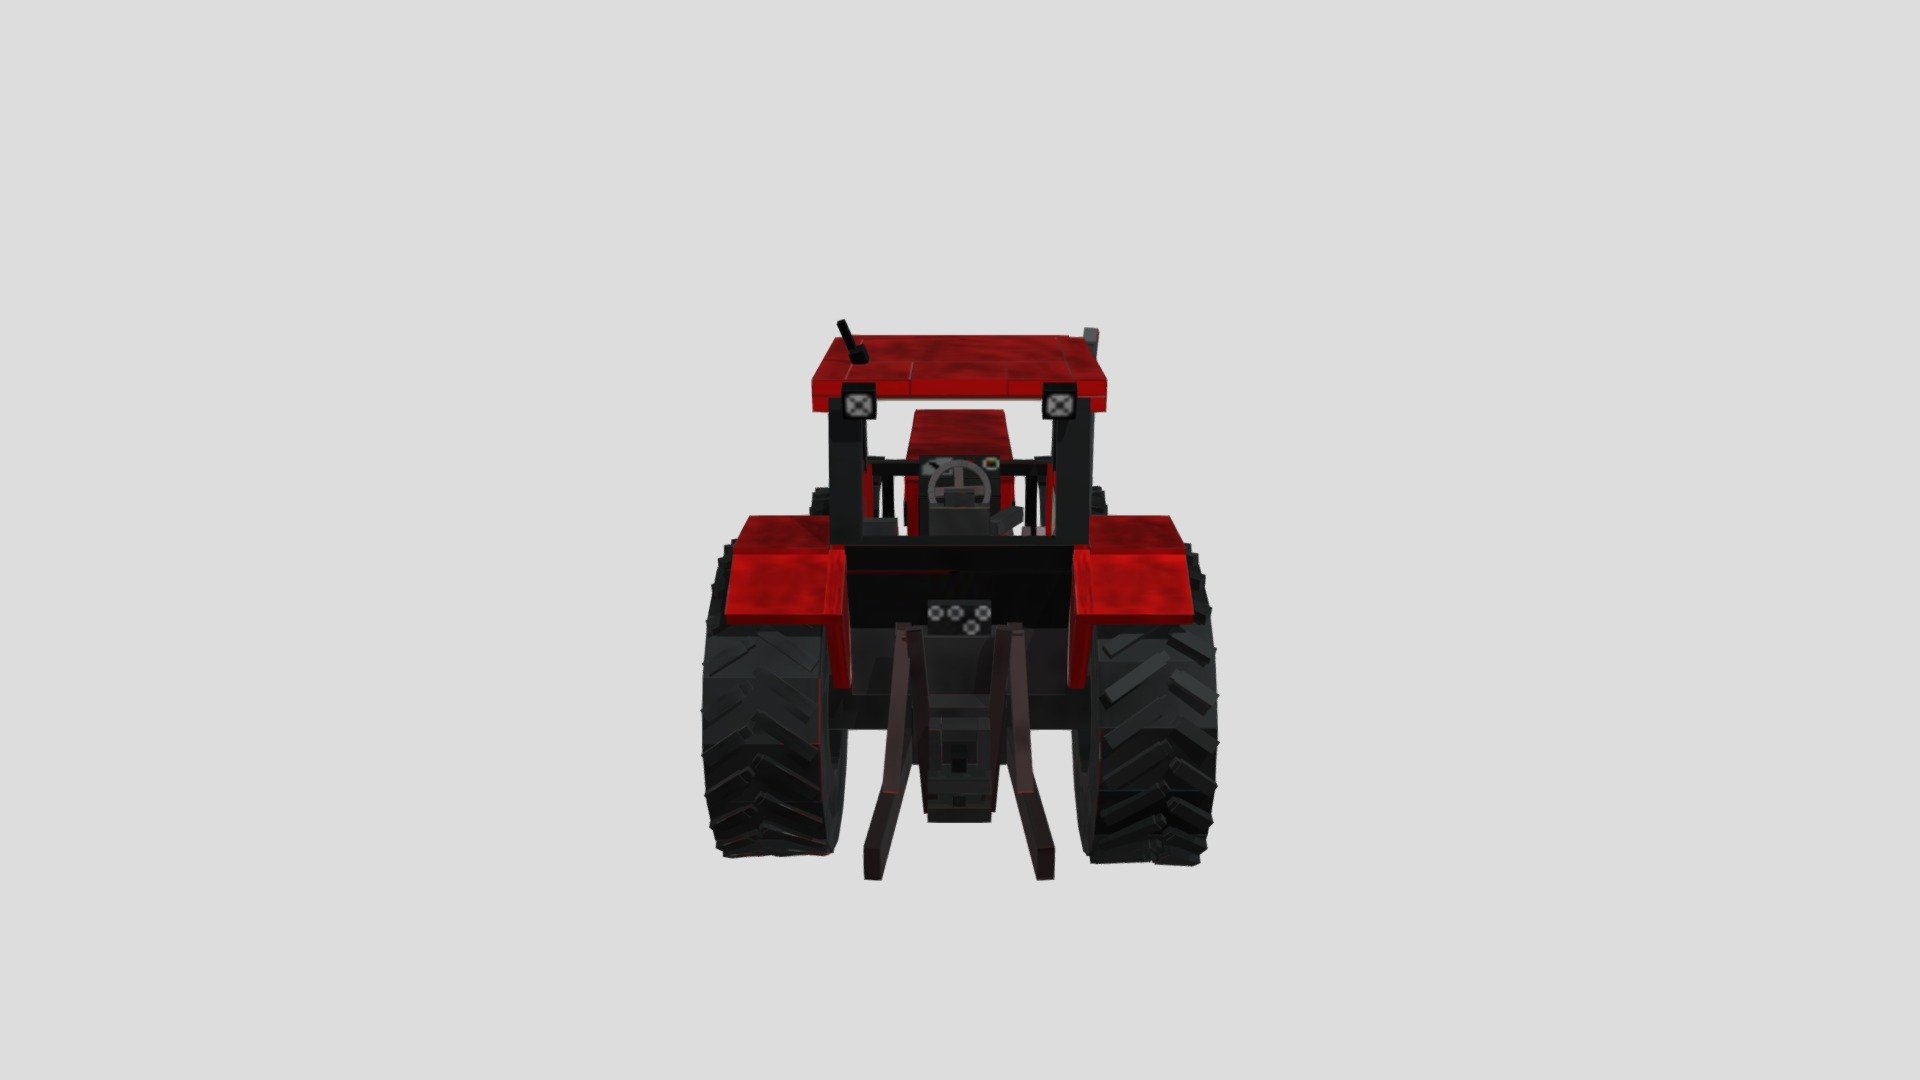 Here is a model of a CASE international 1694 which has been modified to look like a case international 7100. I once upon a time owned a 1694 though I did like the 7100. SO i combined the two ish. Anyway enoy looking at it! - Minecraft Case international 1694 tractor - 3D model by HarriTFB 3d model